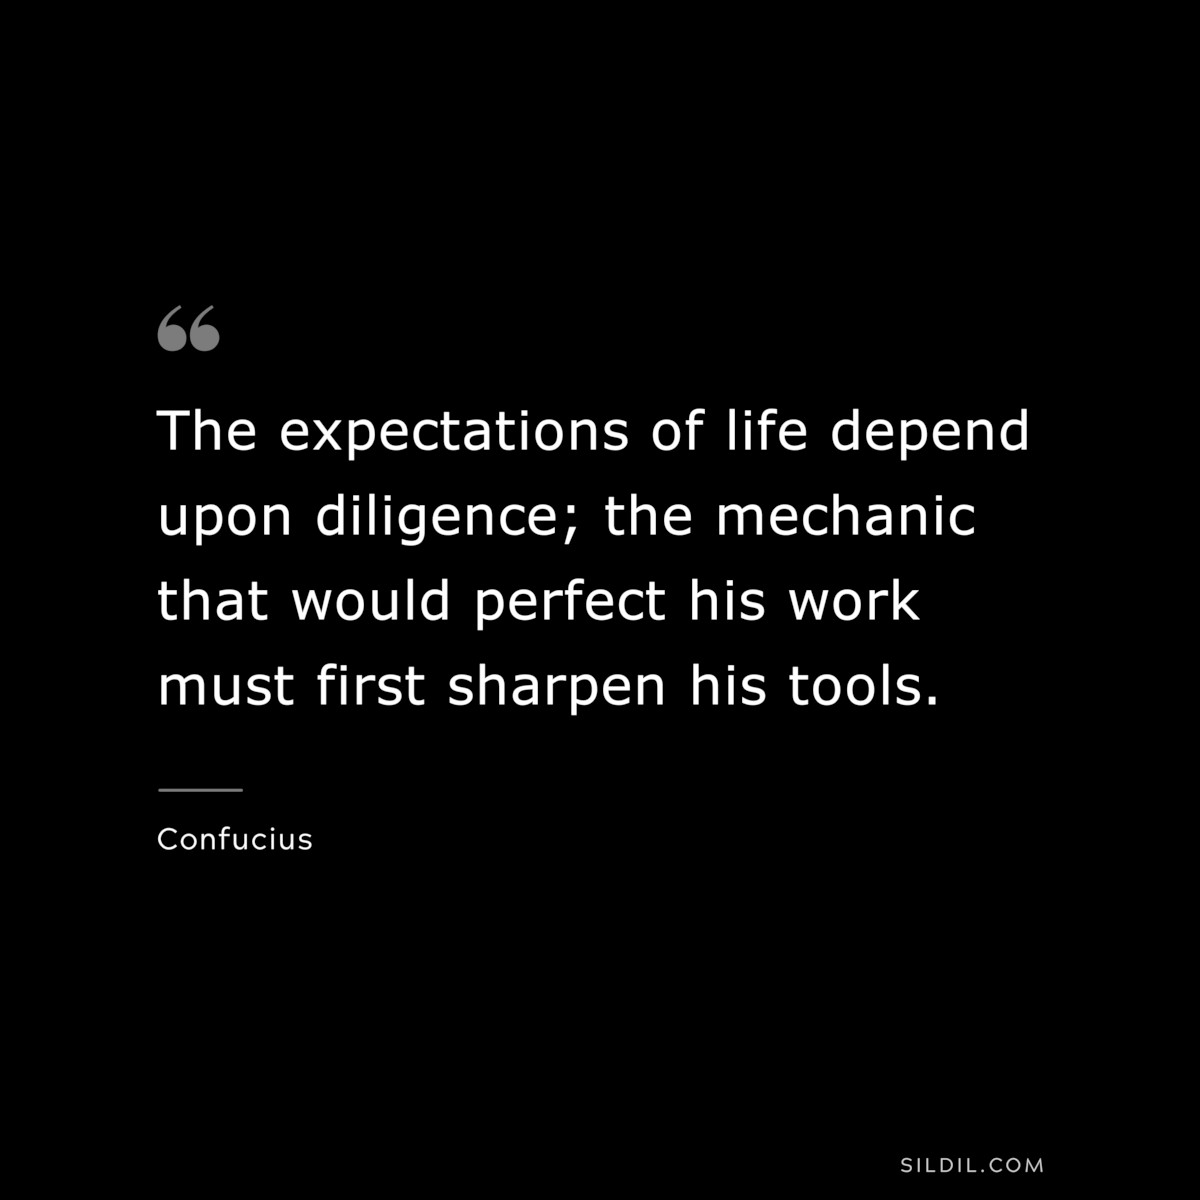 The expectations of life depend upon diligence; the mechanic that would perfect his work must first sharpen his tools. ― Confucius